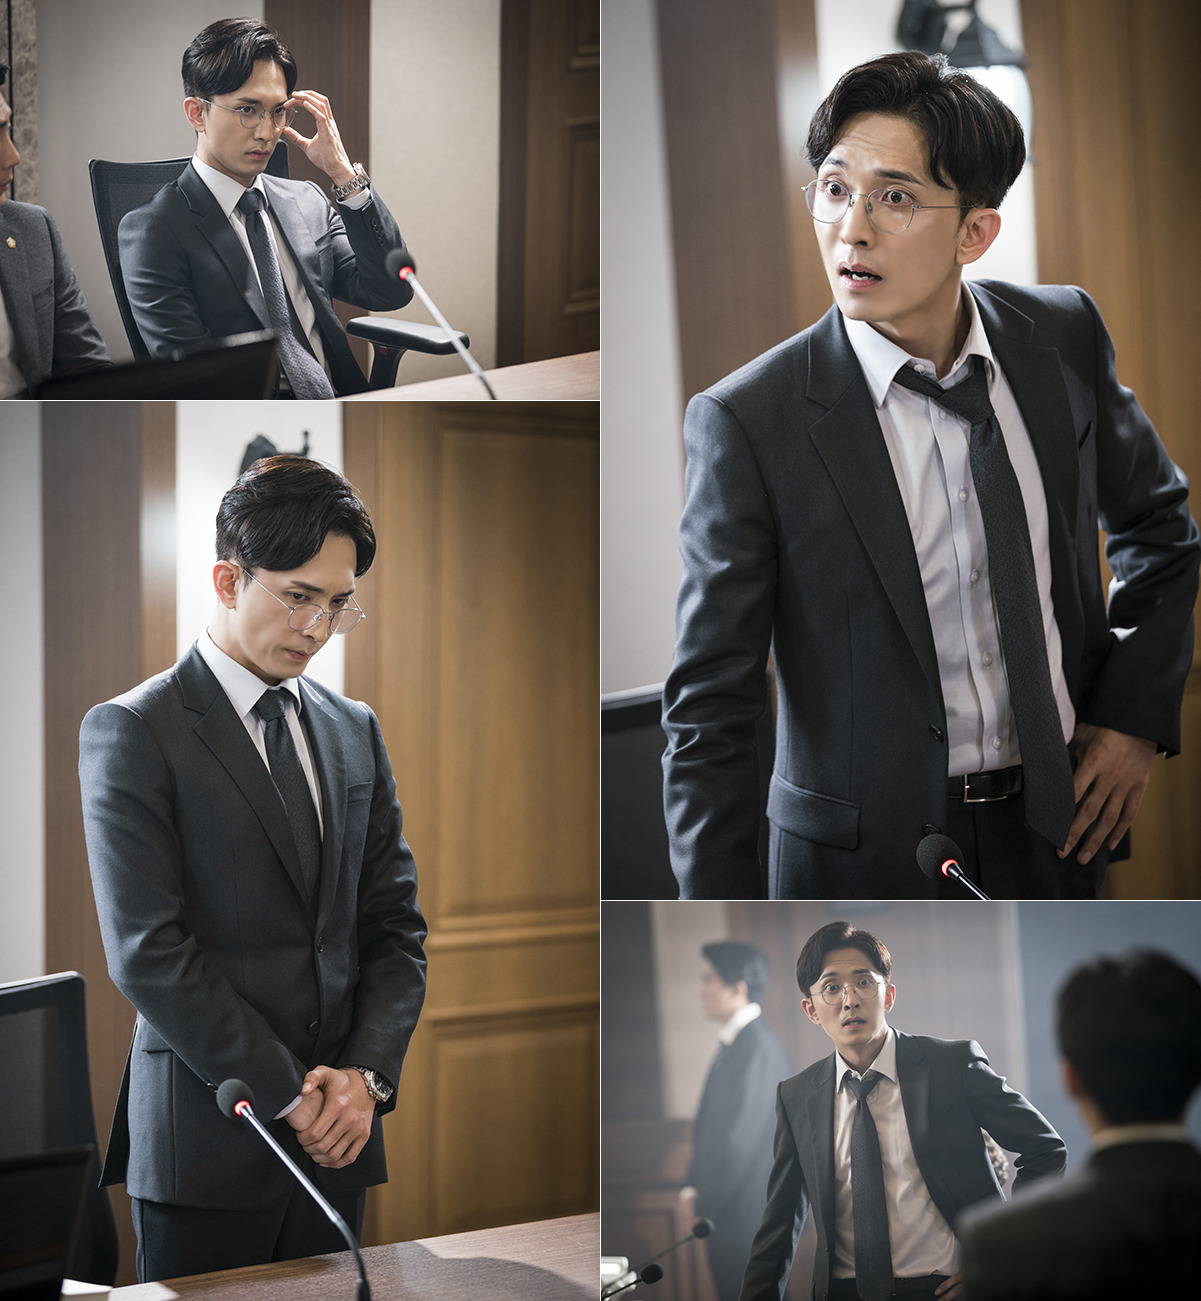 He does not slap an older lawyer, but he kicks a driver like his father, throws what he sees when he does not get out, and hits the person in front of him.In the meantime, I have seen many dramas and movies to see the chaebol of the gold spoon, which is not done, but Lee Ho-seong has a comprehensive set.Many people will have seen his face for the first time with Dear Judge, but his career is not short.He made his debut as a Play Three Corps in 2011 and appeared in many plays and musicals such as Kilminau, Model Students, Capone Trilogy and Logisu.Based on its solid acting ability, it has made a successful CRT debut by capturing the attention of the house theater with SBS Romantic Doctor Kim Sabu.He then showed impressive acting through Ssam, My Way and Sung Seung of Questions and is showing the end of the villain with Dear Judge.The next film, Baega Bond, is also being confirmed and attracting attention.Q. It is a person who is different from himself, but it seems to be shooting with a feeling of enjoying rather than a strange burden.I do that again, dont I? Some of my work is making, but Park is helping Yoon Si-yoon and his colleagues look more like Lee Ho-seong.So I try to do my part more.Q. He is swearing without a circle: In My Way, he was a manless gold spoon, and in The Month of Questions, Bereavement, this time Gutha, a chaebol.Good, of course, its a role that needs to be cursed, and if theres a reaction from viewers, it feels good in itself, just called a villain, but trying to make different decisions for each character.My Way was a sweet man and (of the one of the questions) Song Gil-chun was a Bereavement, so he was a vicious person who killed people casually, and Lee Ho-seong was a figure who added arrogance to the chaebol III.I have done a few evil characters in a row, but I do not think it is time to try a soft and comfortable person. (Laughing) I want to play a role that can be fun and comfortable.I like to have fun and funny things, and I want to play a role that can be funny.Q. What kind of person is the actual Yun bamboo?Hes a great talker. I want to make someone with me fun. Im so happy when I laugh and enjoy myself.(Laughing) So how strange it would be when I was a villain. Ha ha.Q. What about the reactions of people around you when you play a villain. If theres an interesting episode.When I was in the Winning of Questions, I was in the same room with the woman, and she saw me and put me on the wall.(Laughing) I received a lot of Misunderstood that I dont think Ill be the usual personality again this time.The stylist also said that people around him asked Yun bamboo how is your usual personality and what do you throw in the car?When I hear such Misunderstock, I feel fulfilled in myself that I am going well.(Laughing) I also hear the viewers who watched the broadcast laughing and saying, Im so bad that Im shaking.Q. I performed a lot as well as drama. What genre is good for me.Play or musical, I think the same way to approach it is. Its hard to say the best thing for me.Its all fun now, because Acting is always fun and its the thing I can make me happier.Q. It seems that it is time to be active in the stage of play and now to be Ali to more people in drama. What kind of mind is it now?I want to work harder and the country will want to be Ali for Actors presence, I dont think Ive shown a few percent of myself yet, I think I have more cards.I hope I can show you fun and diverse characters, and Im looking forward to it, moving on to a joyful and happy mindset.